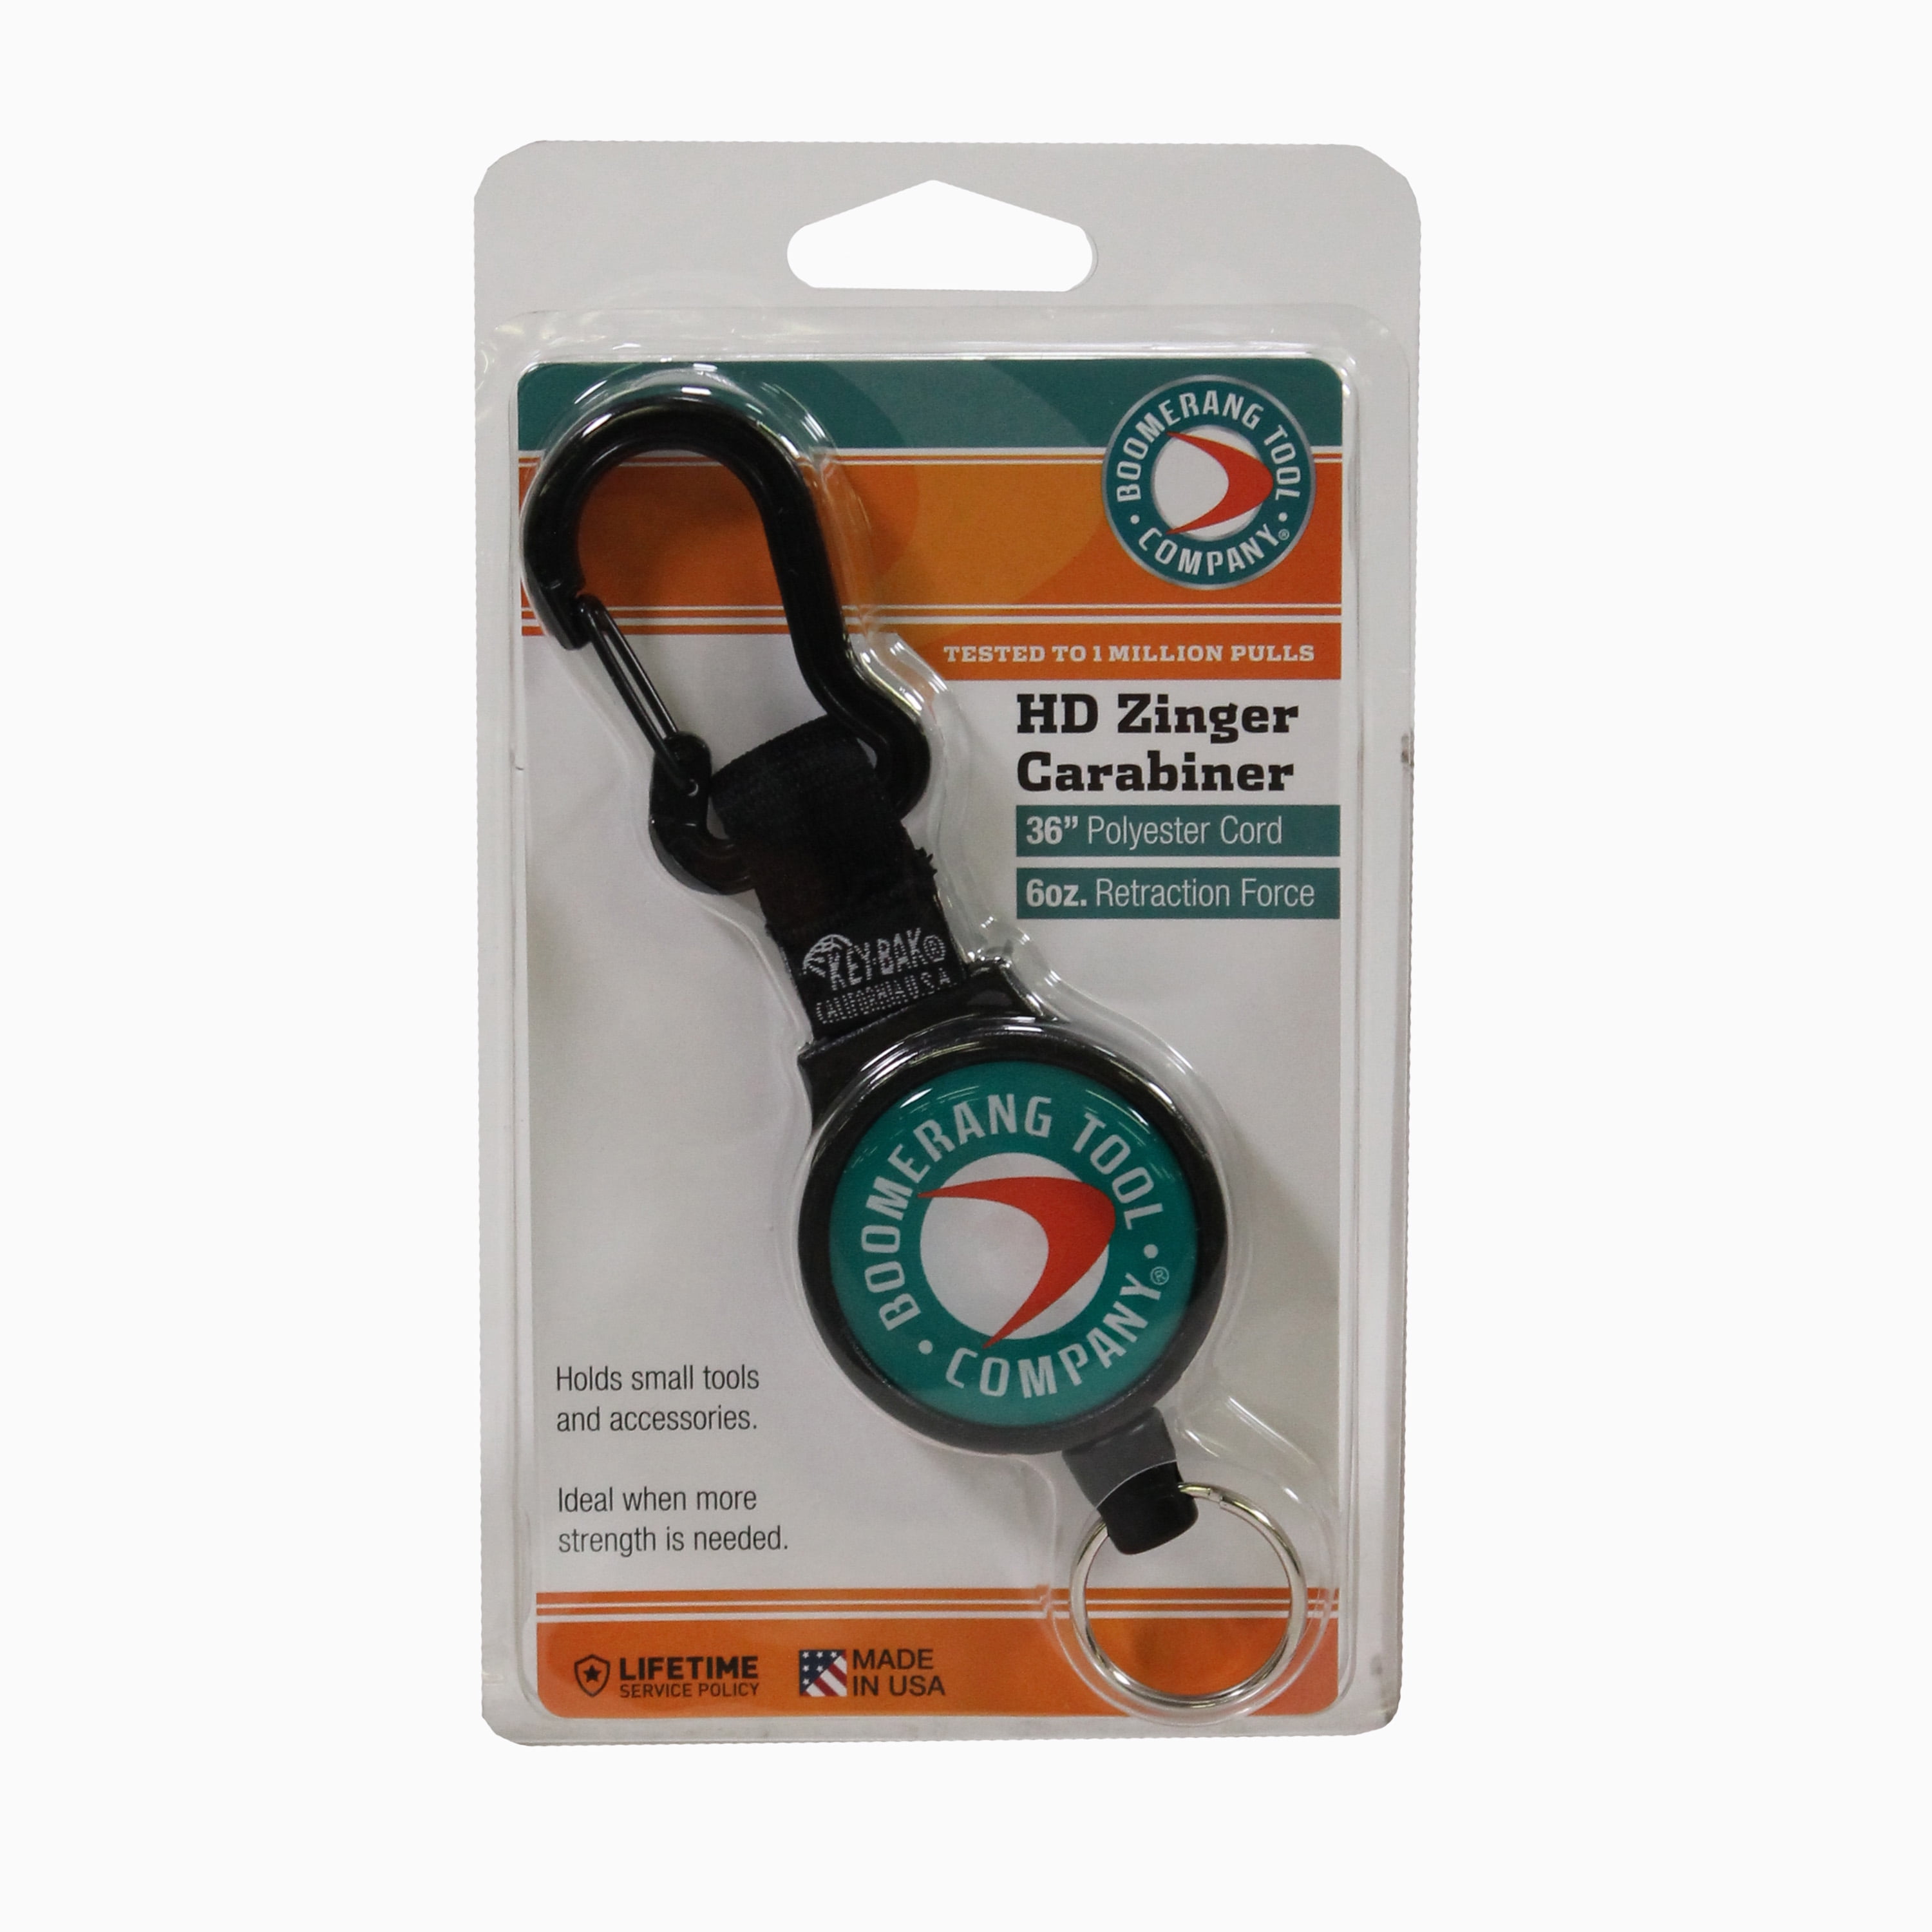 Heavy Duty Carabiner Zinger with 36 Retractable Kevlar Cord and Retracts  Fishing Tools up to 6 oz. 